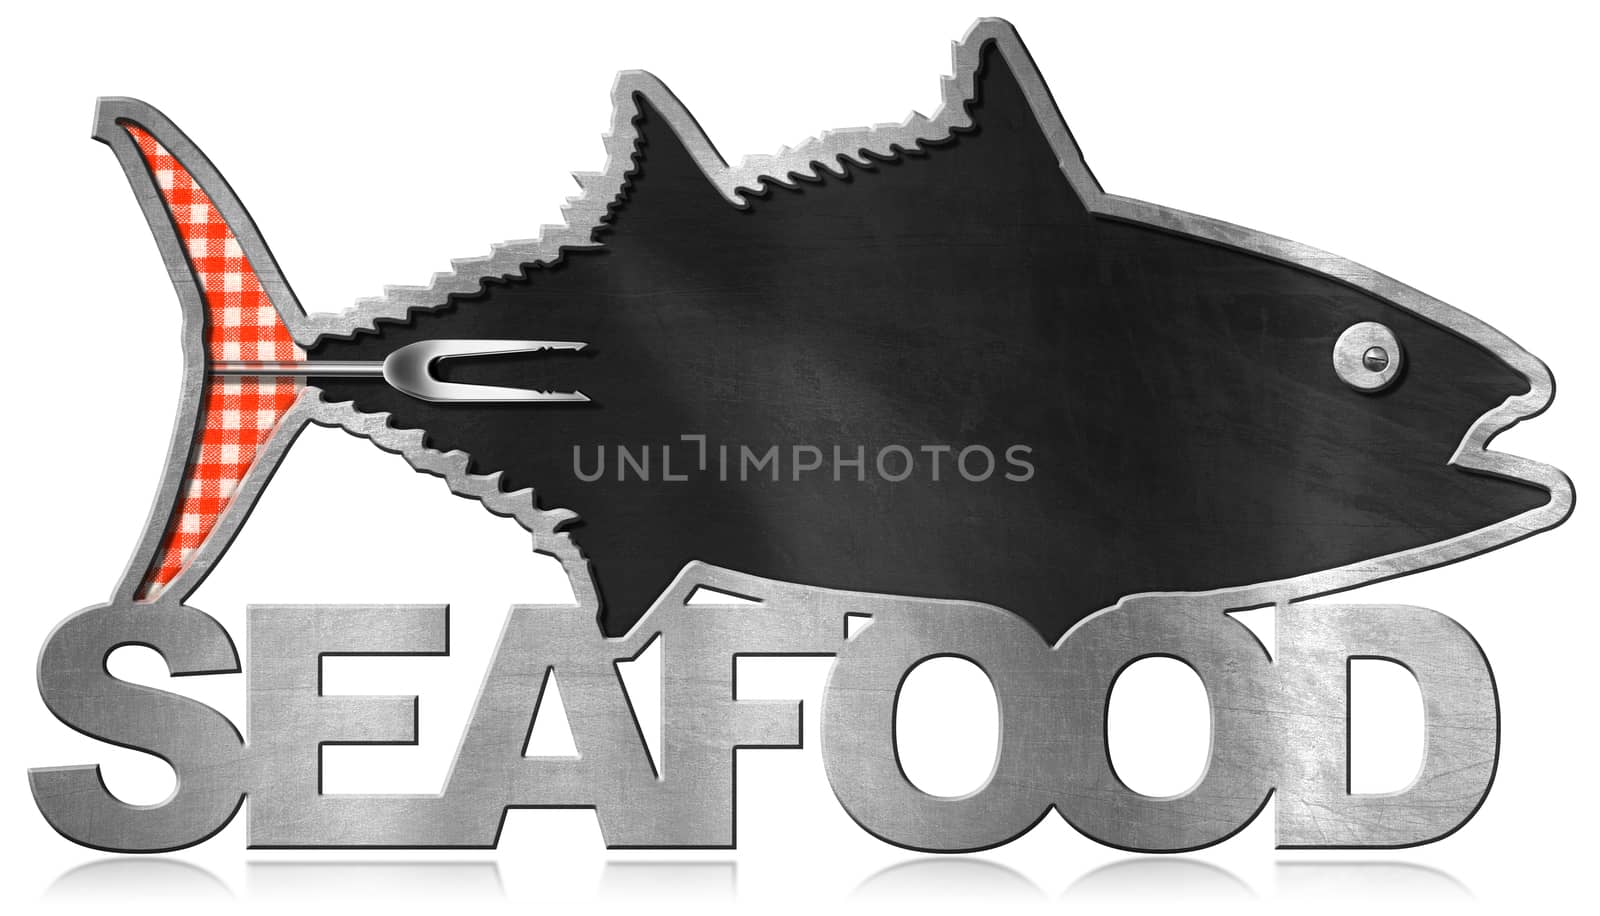 Blackboard with metal frame in the shape of fish with text Seafood, checkered tablecloth and fork. Isolated on white background